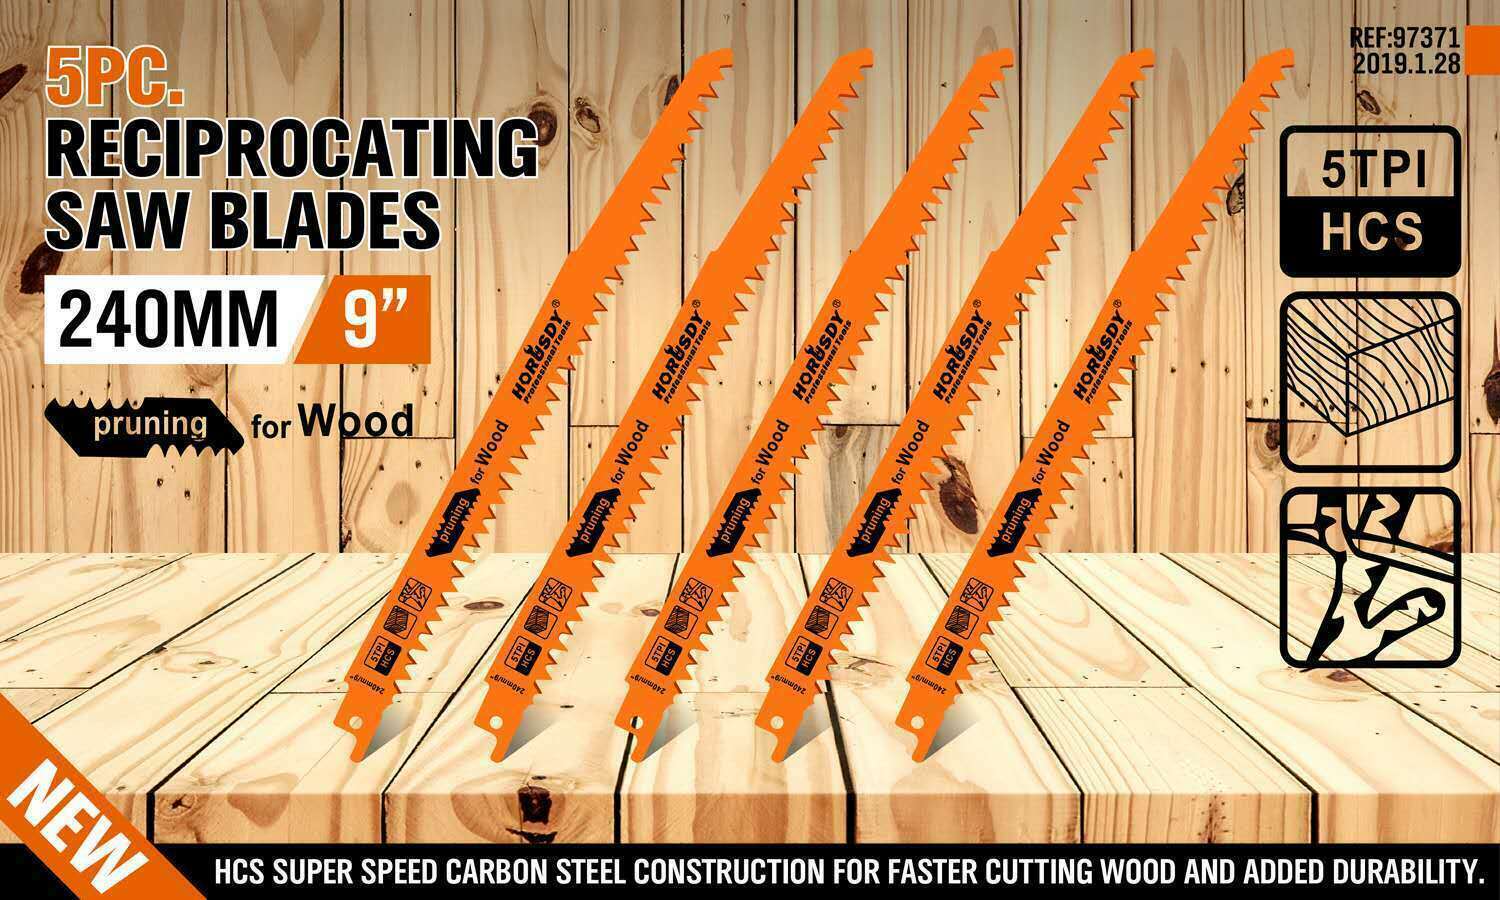 5Pc 9" / 240mm Reciprocating Saw Blades 5TPI Wood Timber Pruning Tool W/T Case - 0